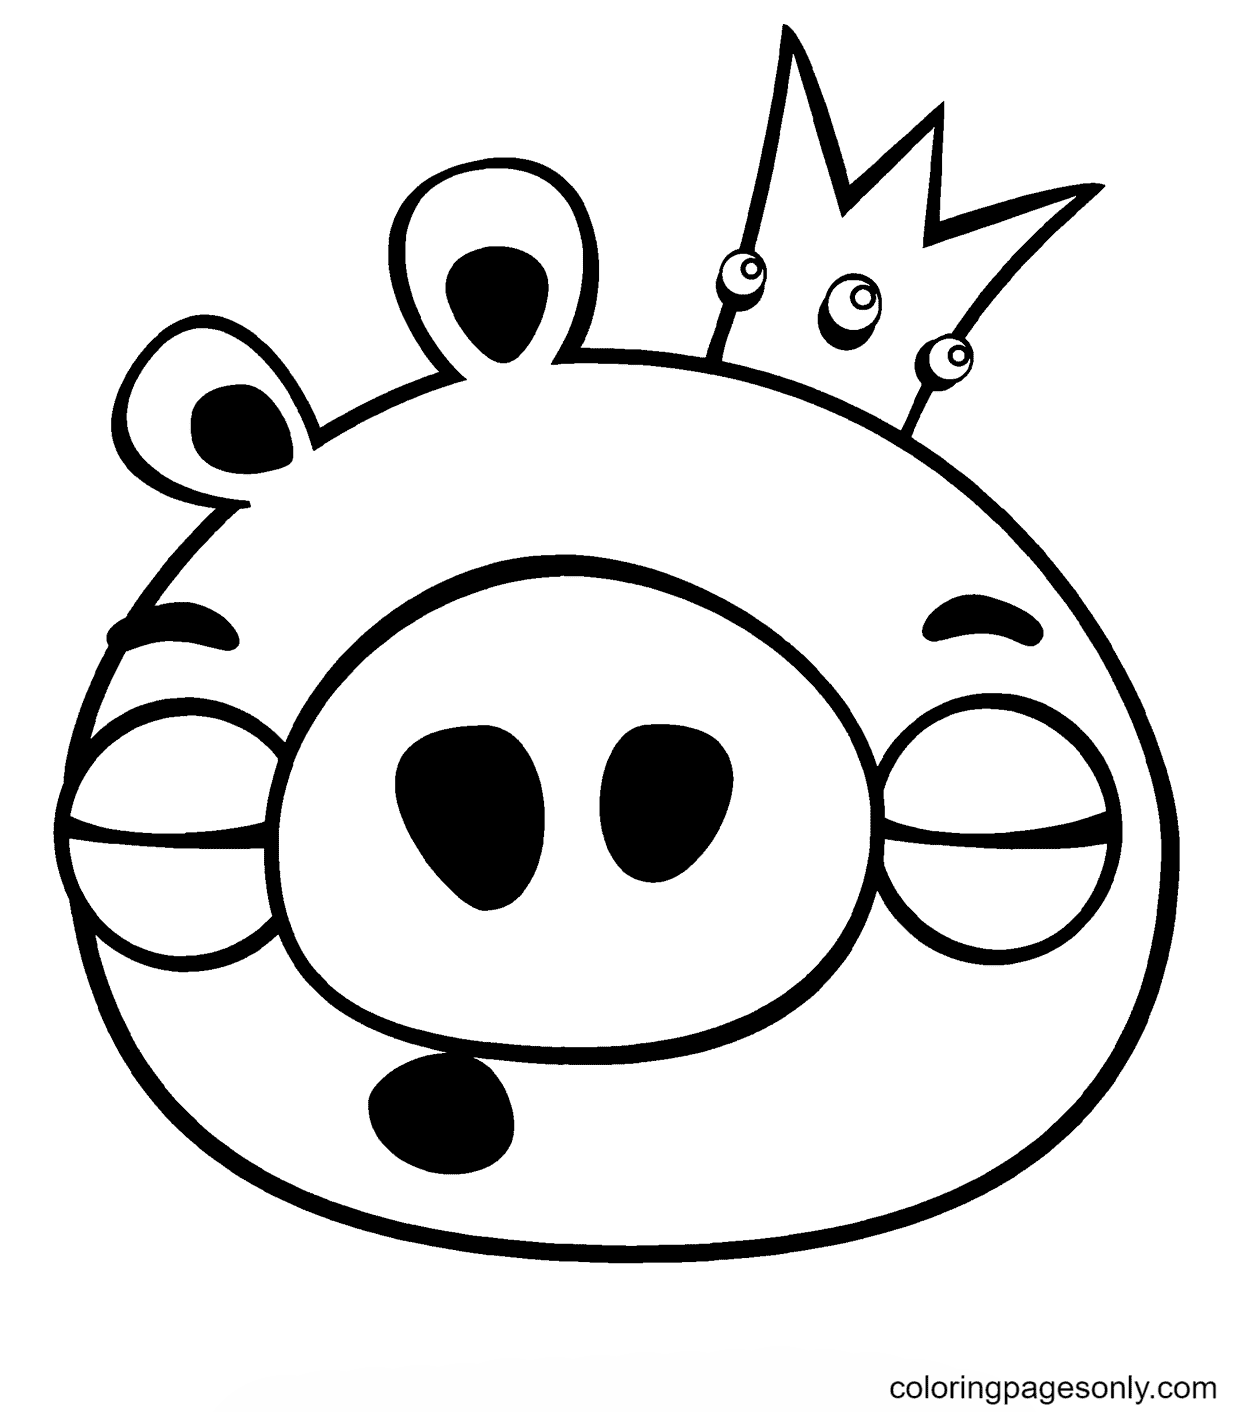 King Pig is Sleeping Coloring Page